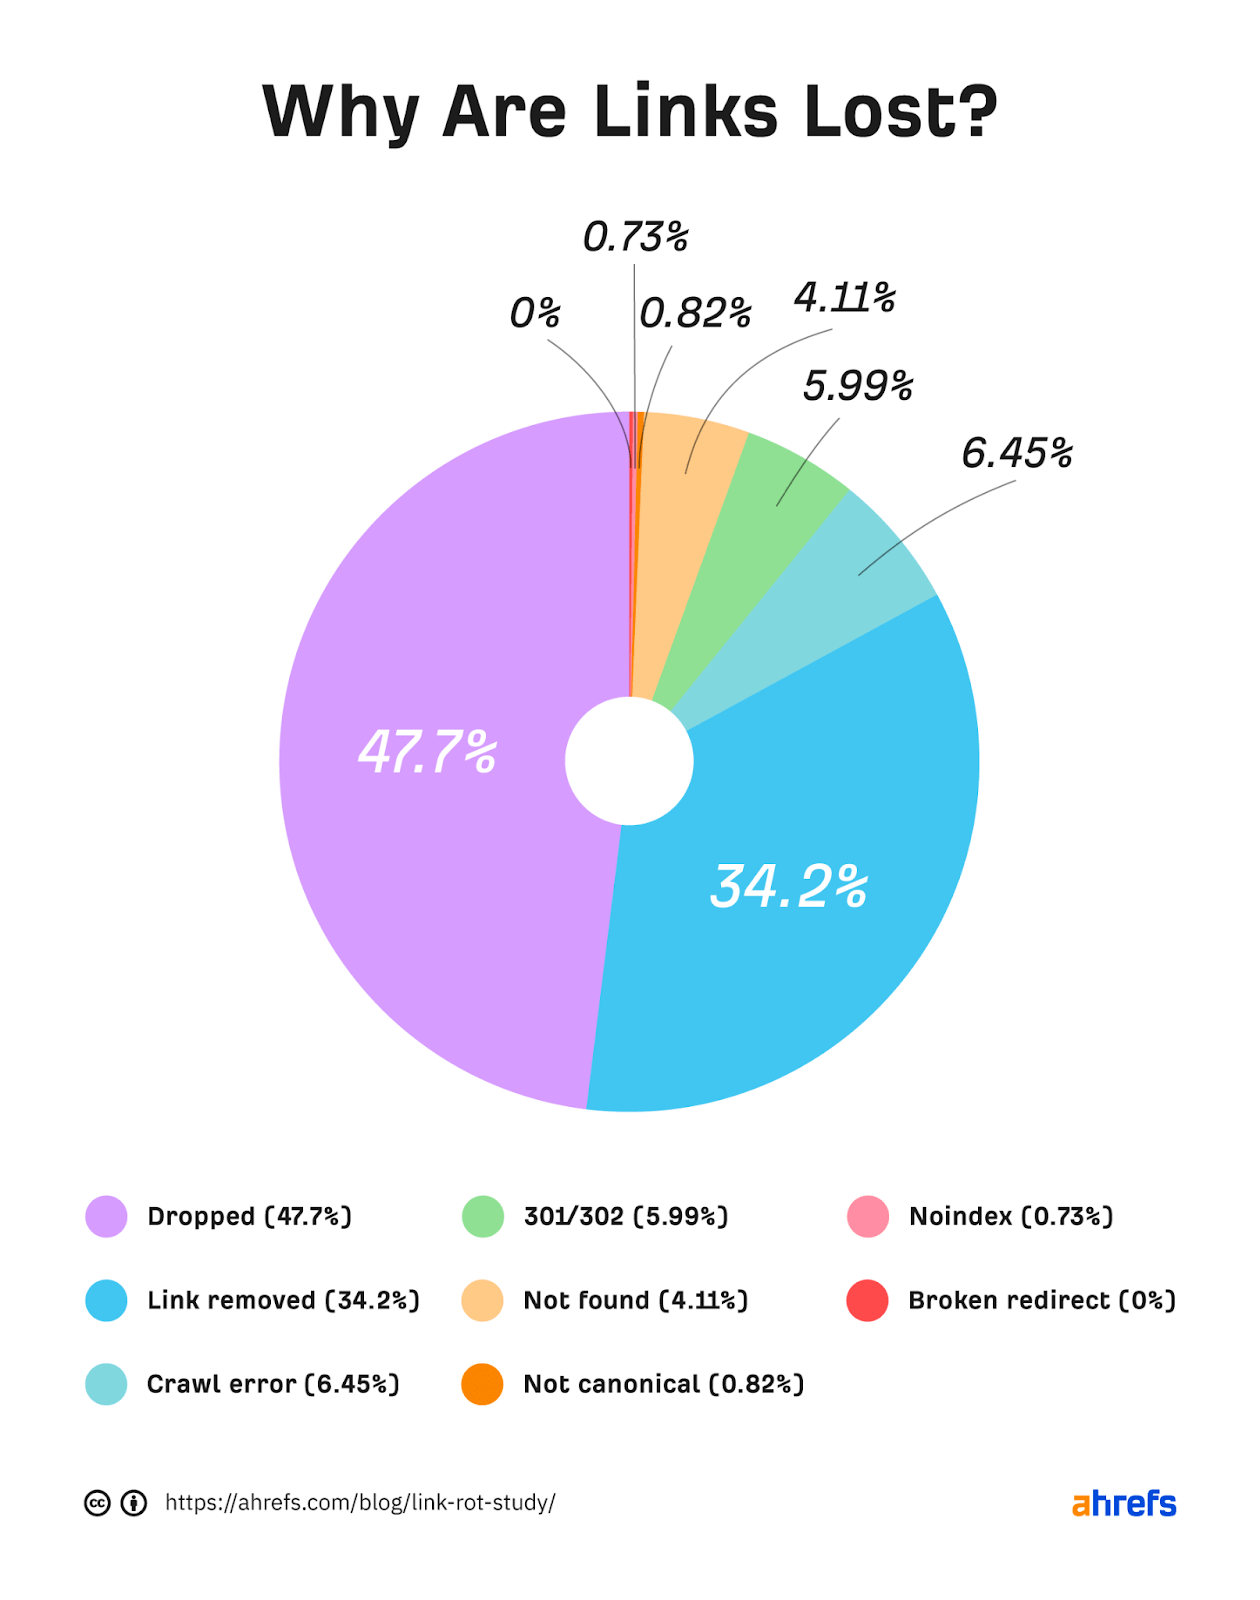 Pie chart showing the main reasons links are lost